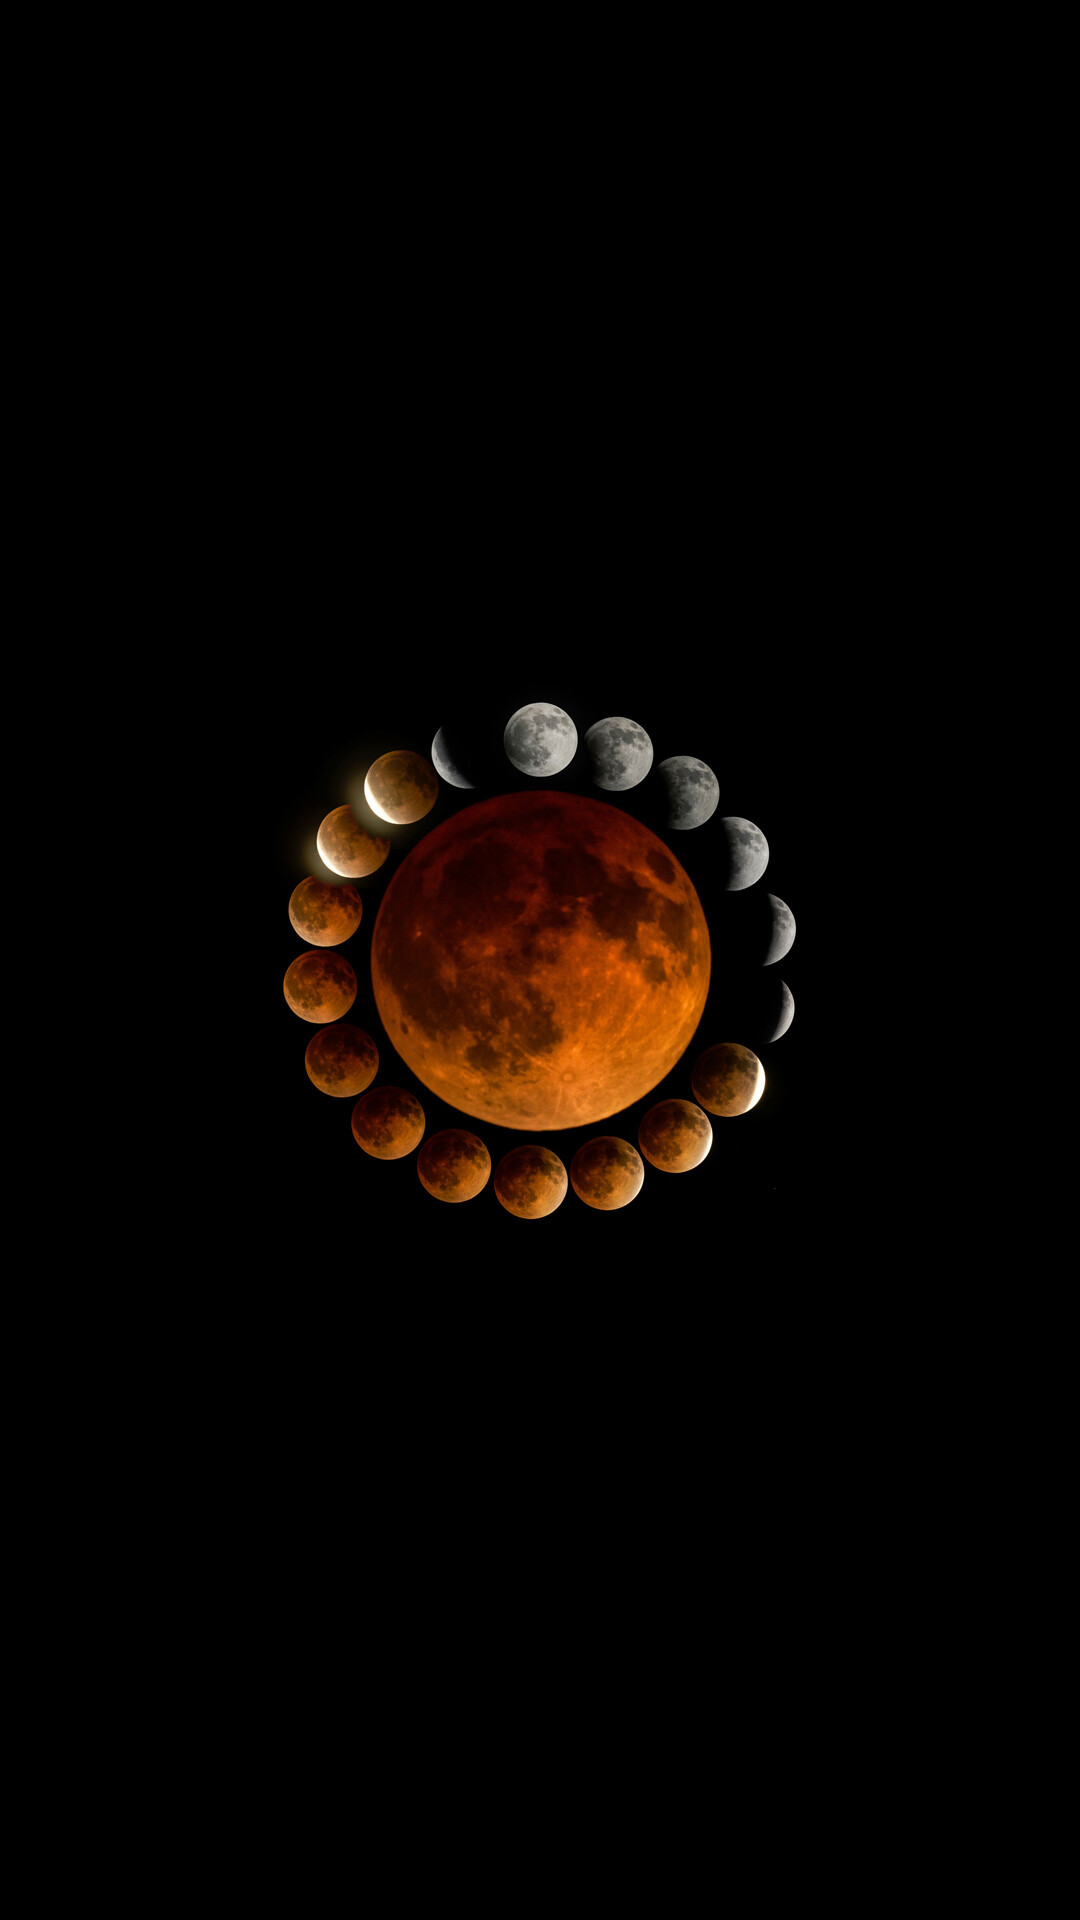 Lunar eclipse phase for iPhone, Celestial allure, Night sky's marvel, Astronomical wonder, 1080x1920 Full HD Phone